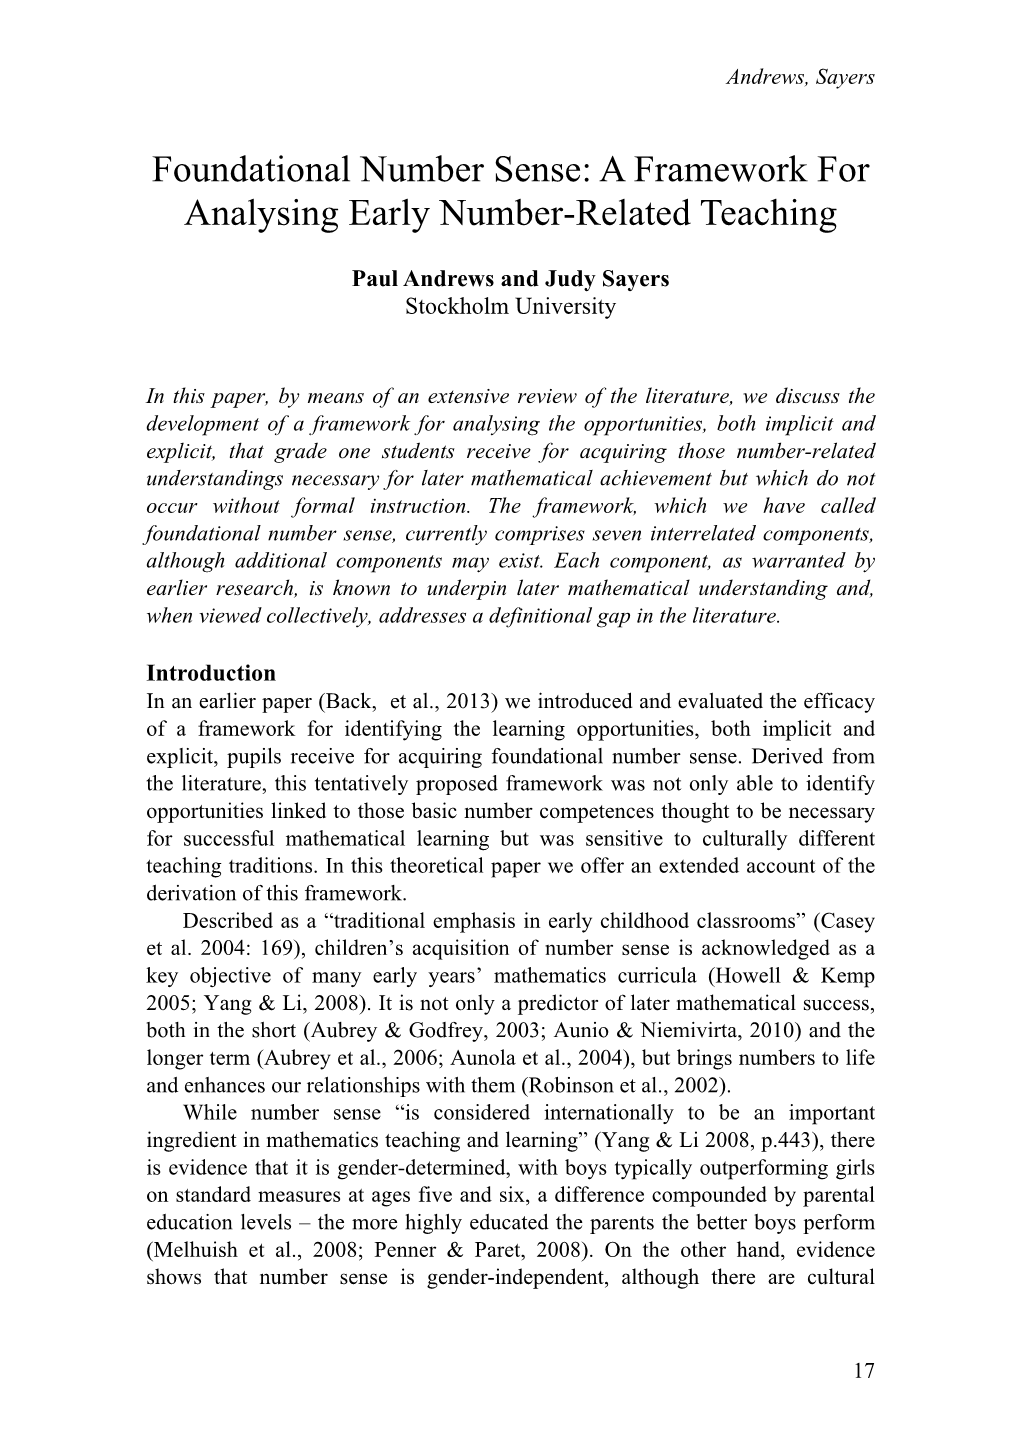 Foundational Number Sense: a Framework for Analysing Early Number-Related Teaching